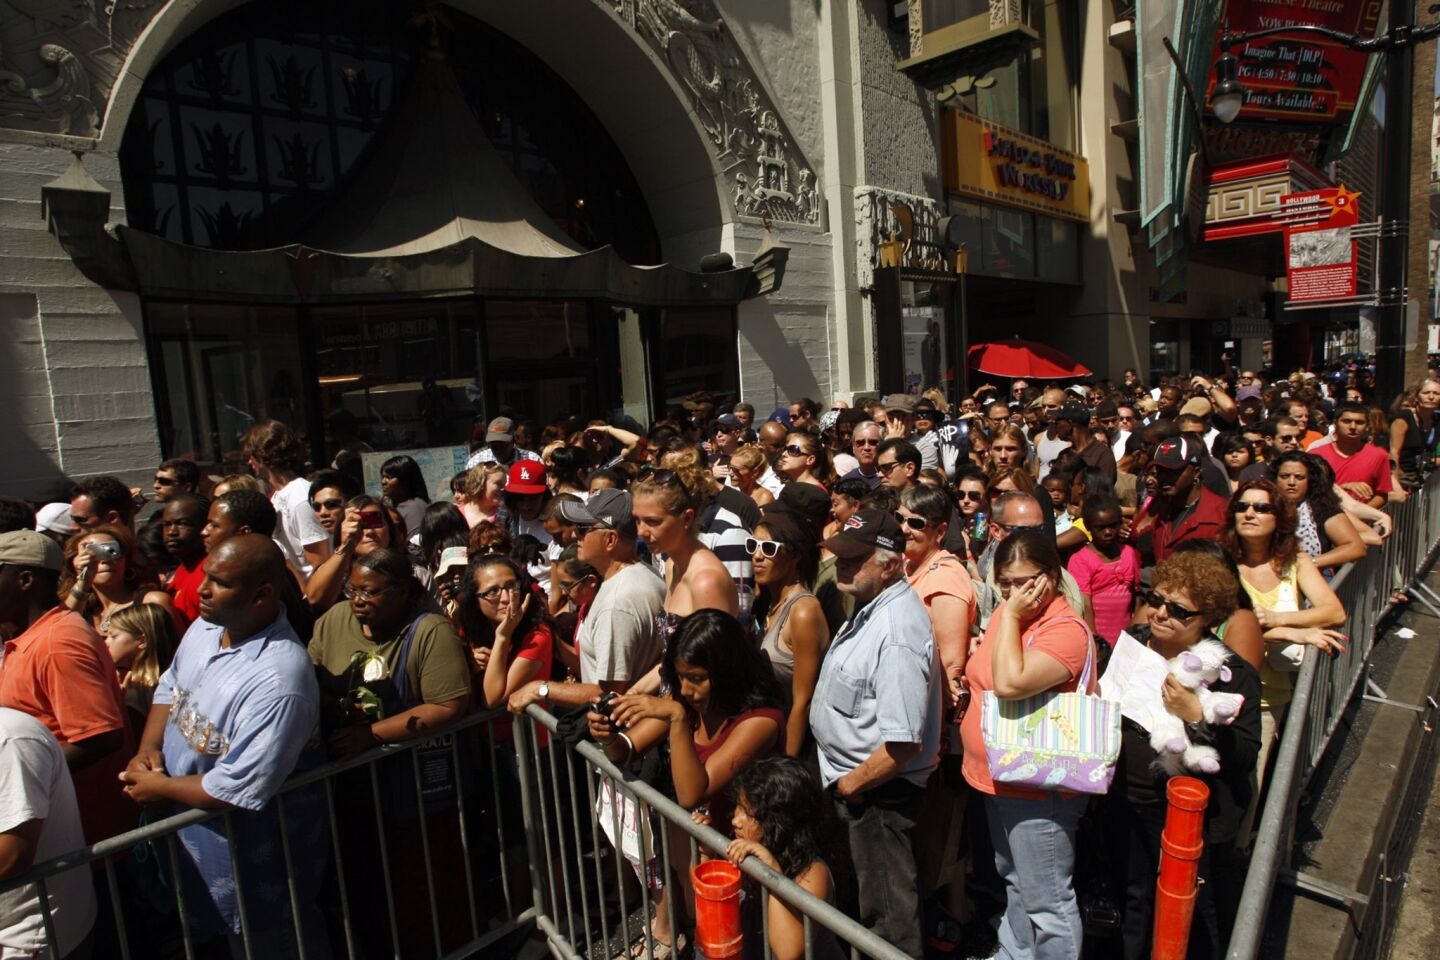 The Hollywood Walk of Fame passes in front of the Chinese Theatre's entrance. A star commemorating Michael Jackson can be found there. On June 26, 2009, the day after the singer's death, fans gather to pay tribute.